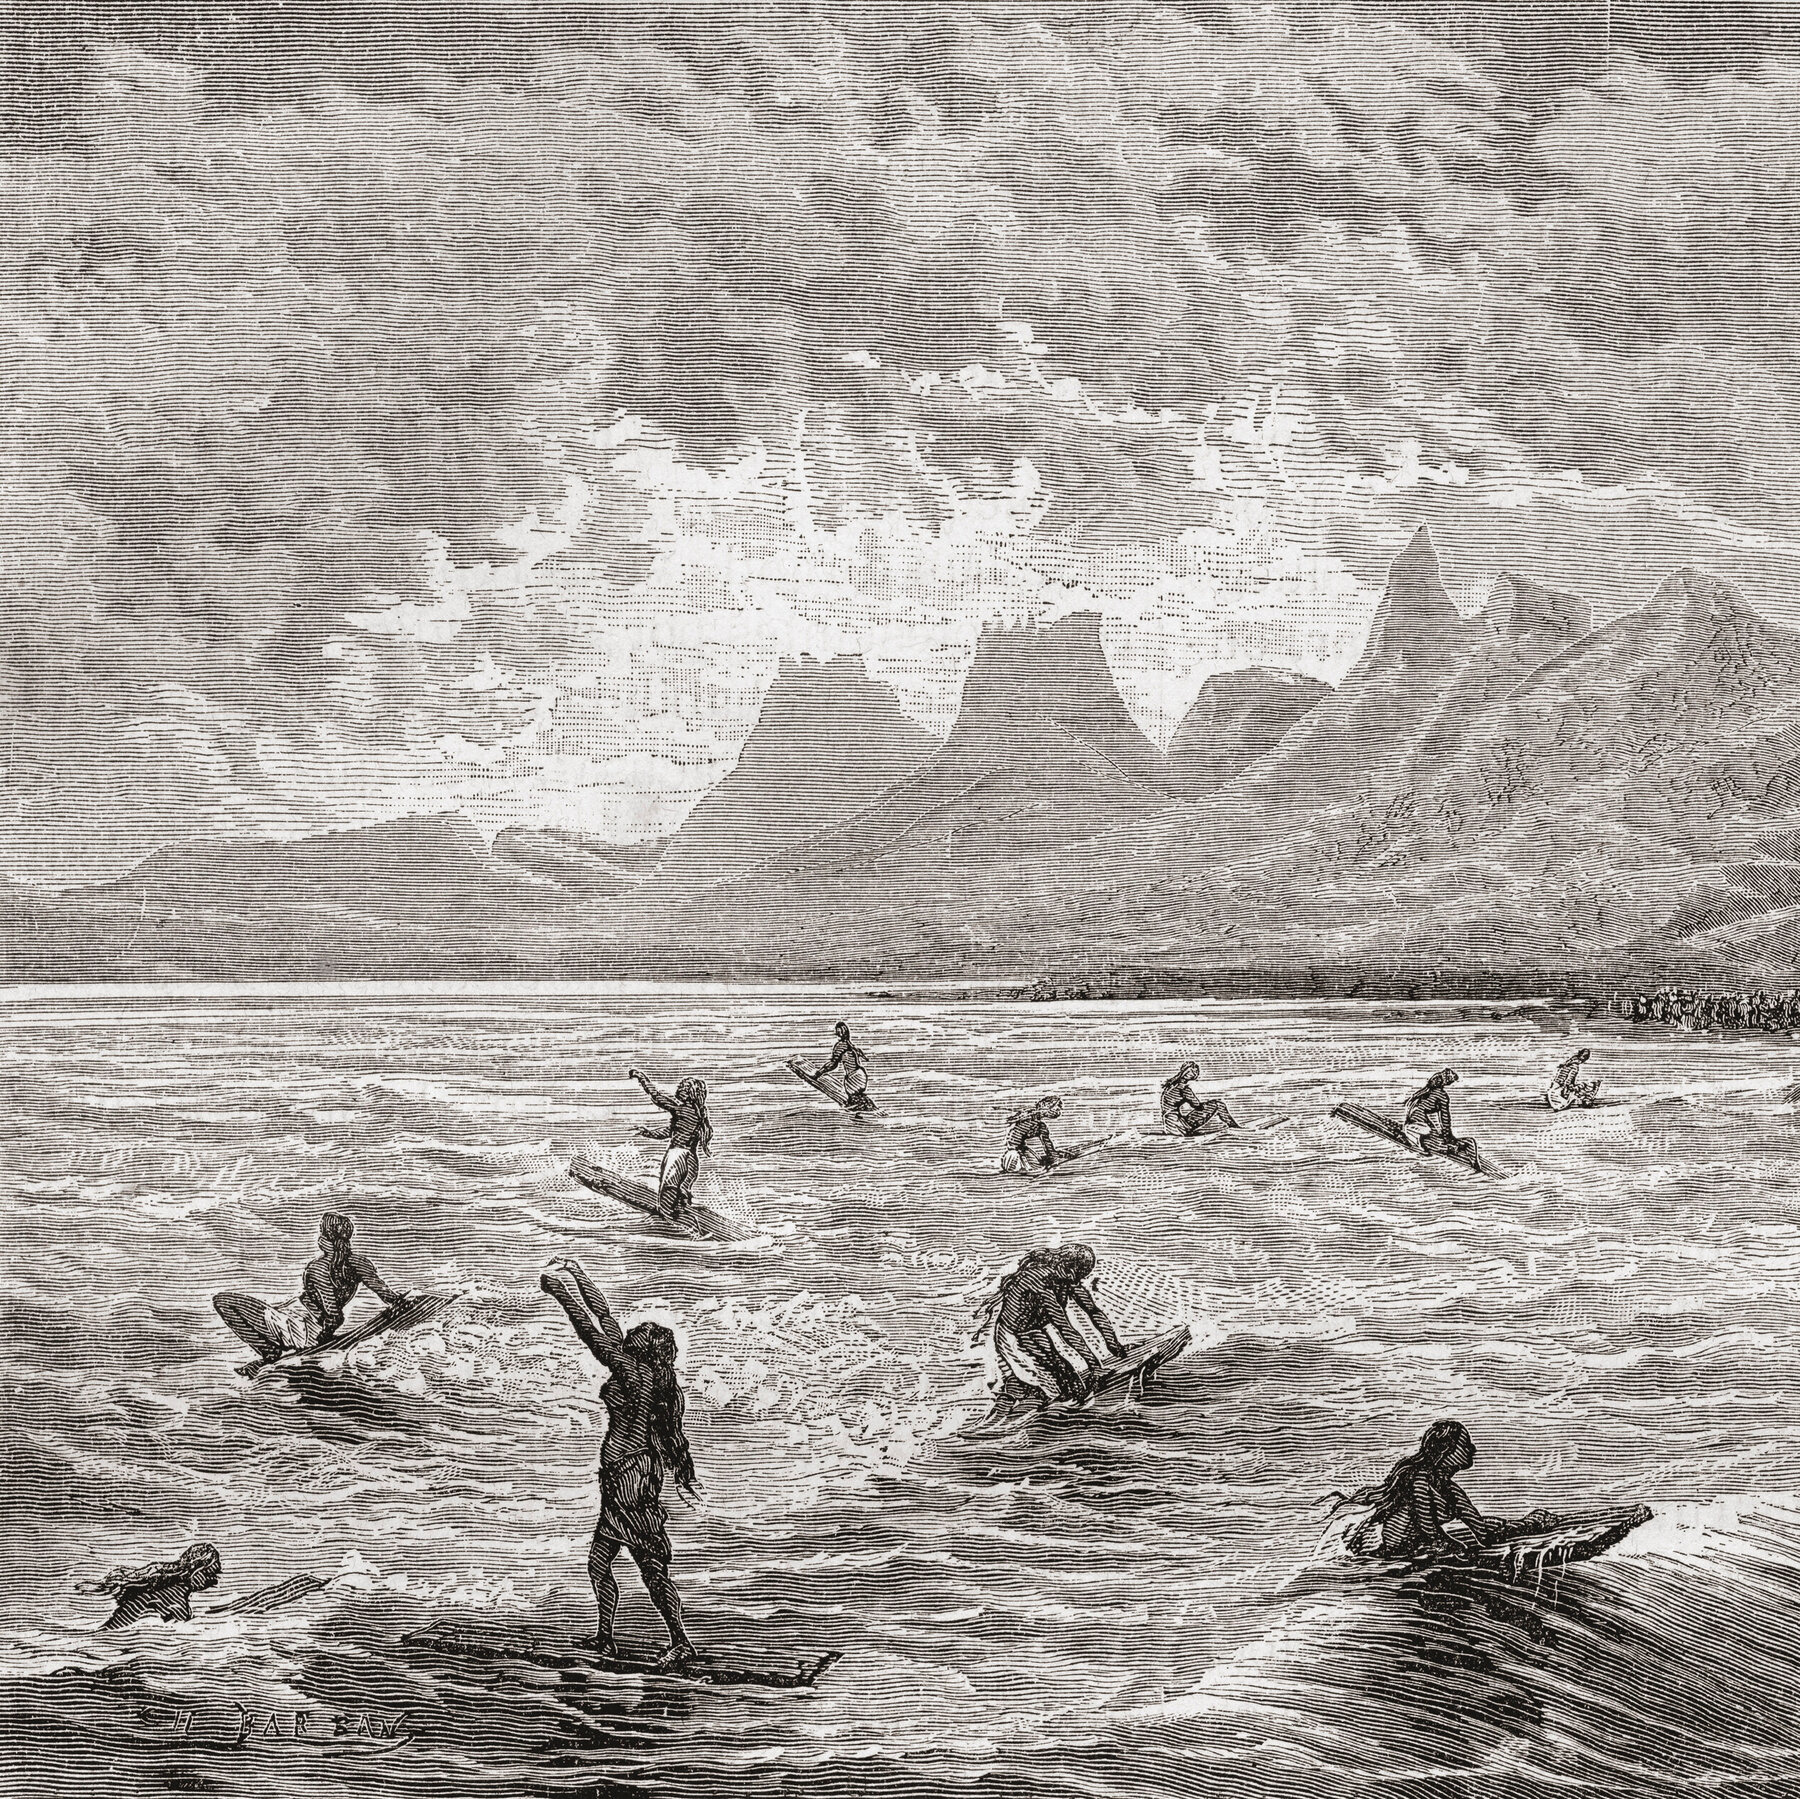 Ancient surfing in Hawaii